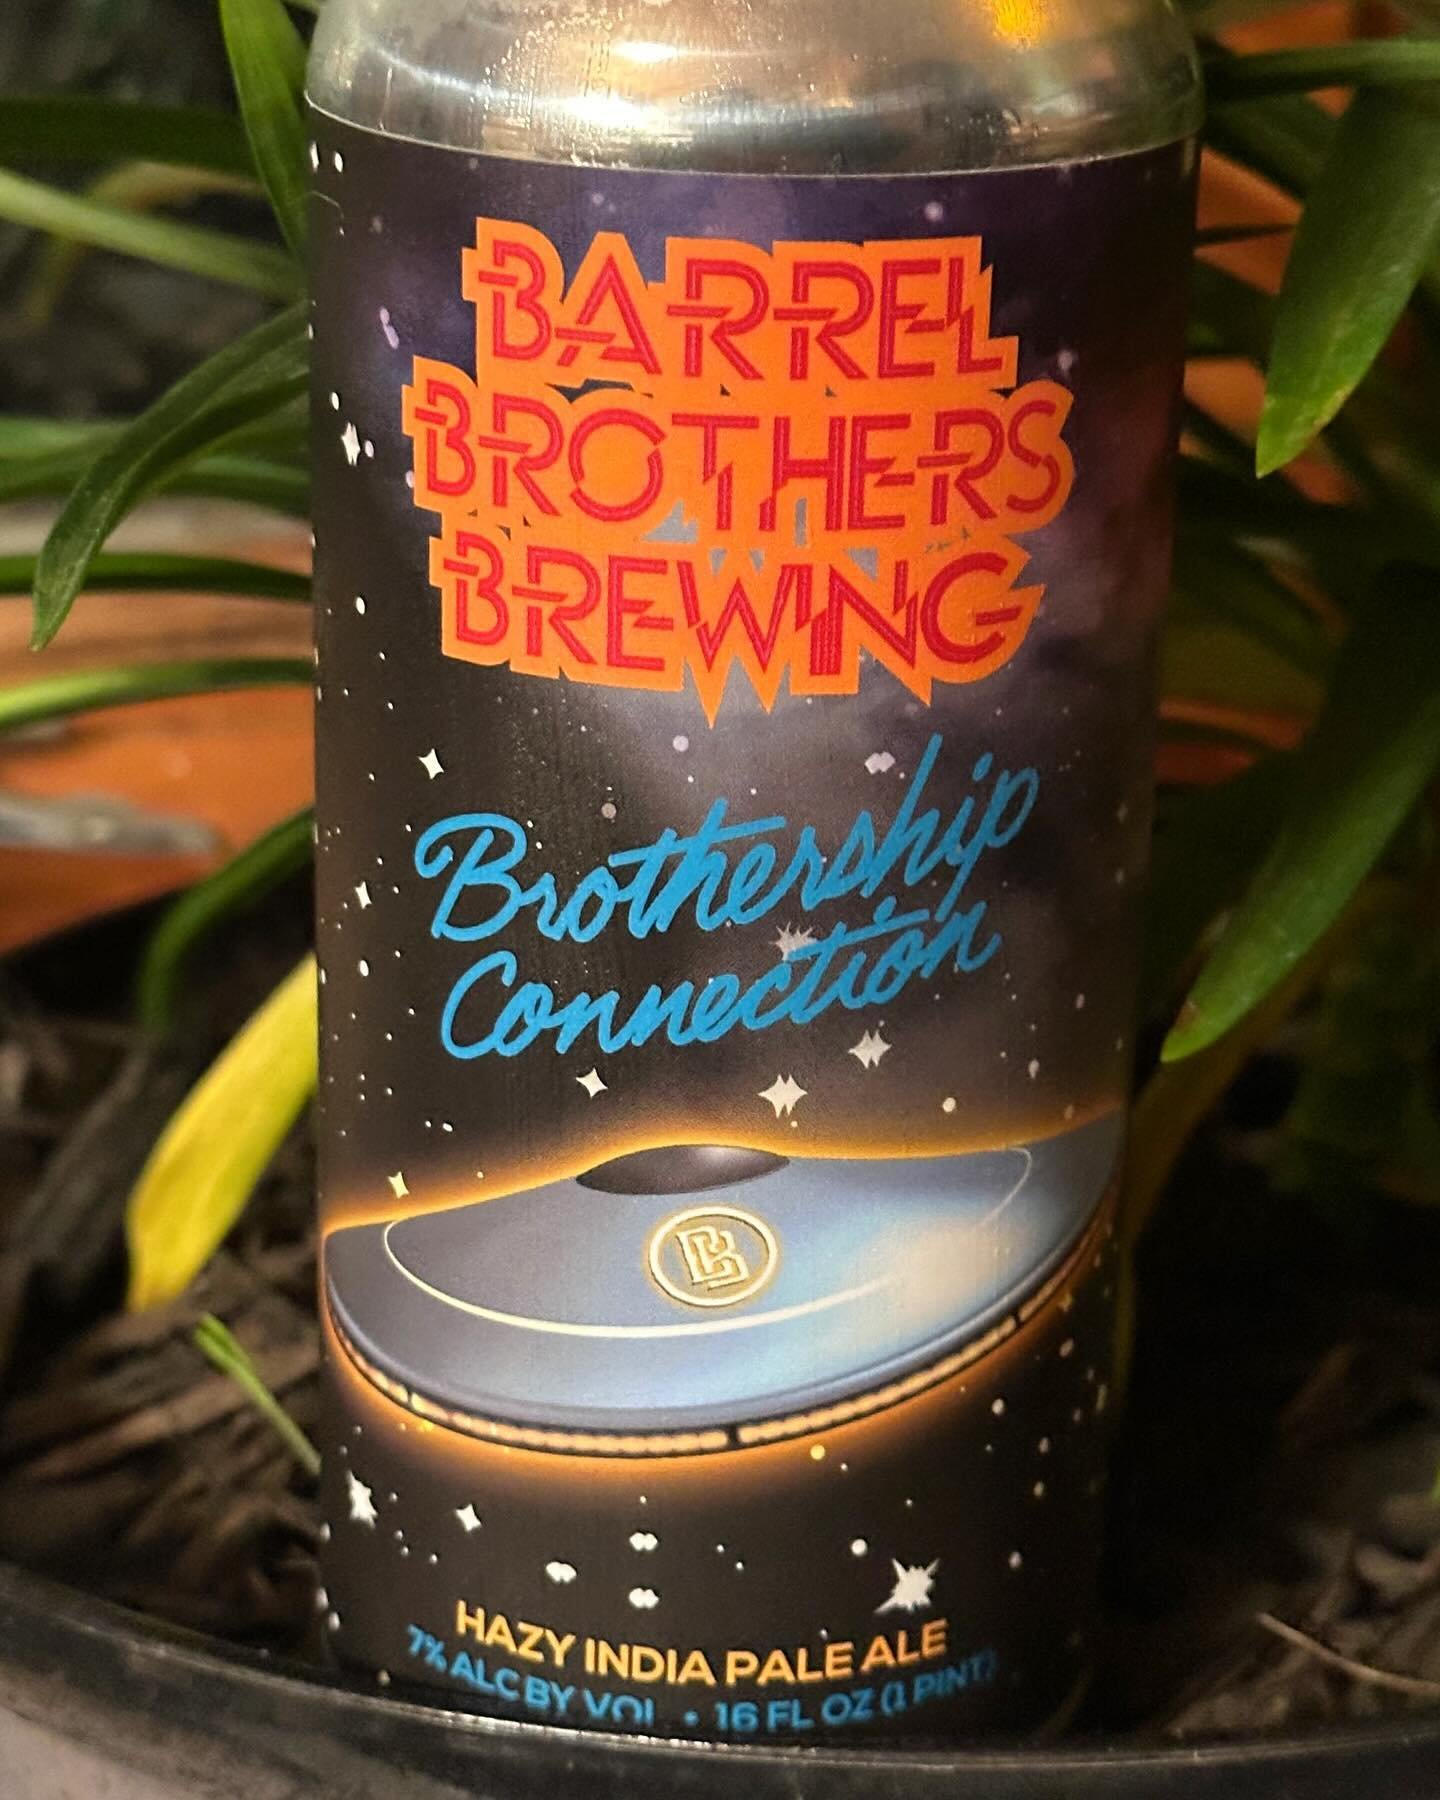 Lovin&rsquo; the Brothership Connection from @barrelbrothersbrewing &hellip; a delicious #hazyipa perfect for NorCal spring weather!
🌛🛸🌜
A fantastically smooth 7% ABV featuring Comet, Apollo, &amp; Citra hops! And with the funkiest can art to boot